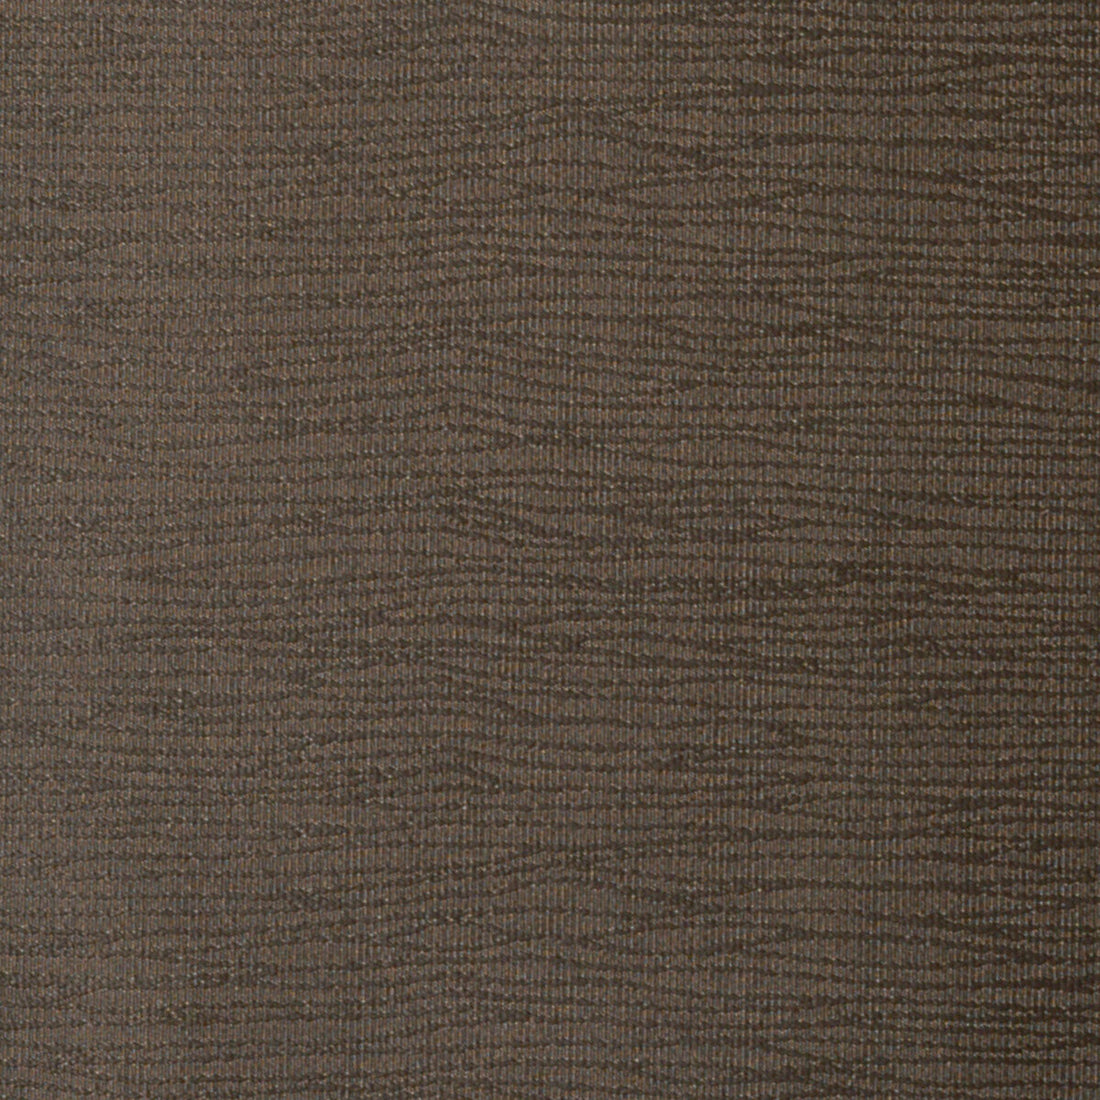 Seismic fabric in espresso color - pattern SEISMIC.66.0 - by Kravet Contract in the Contract Sta-Kleen collection